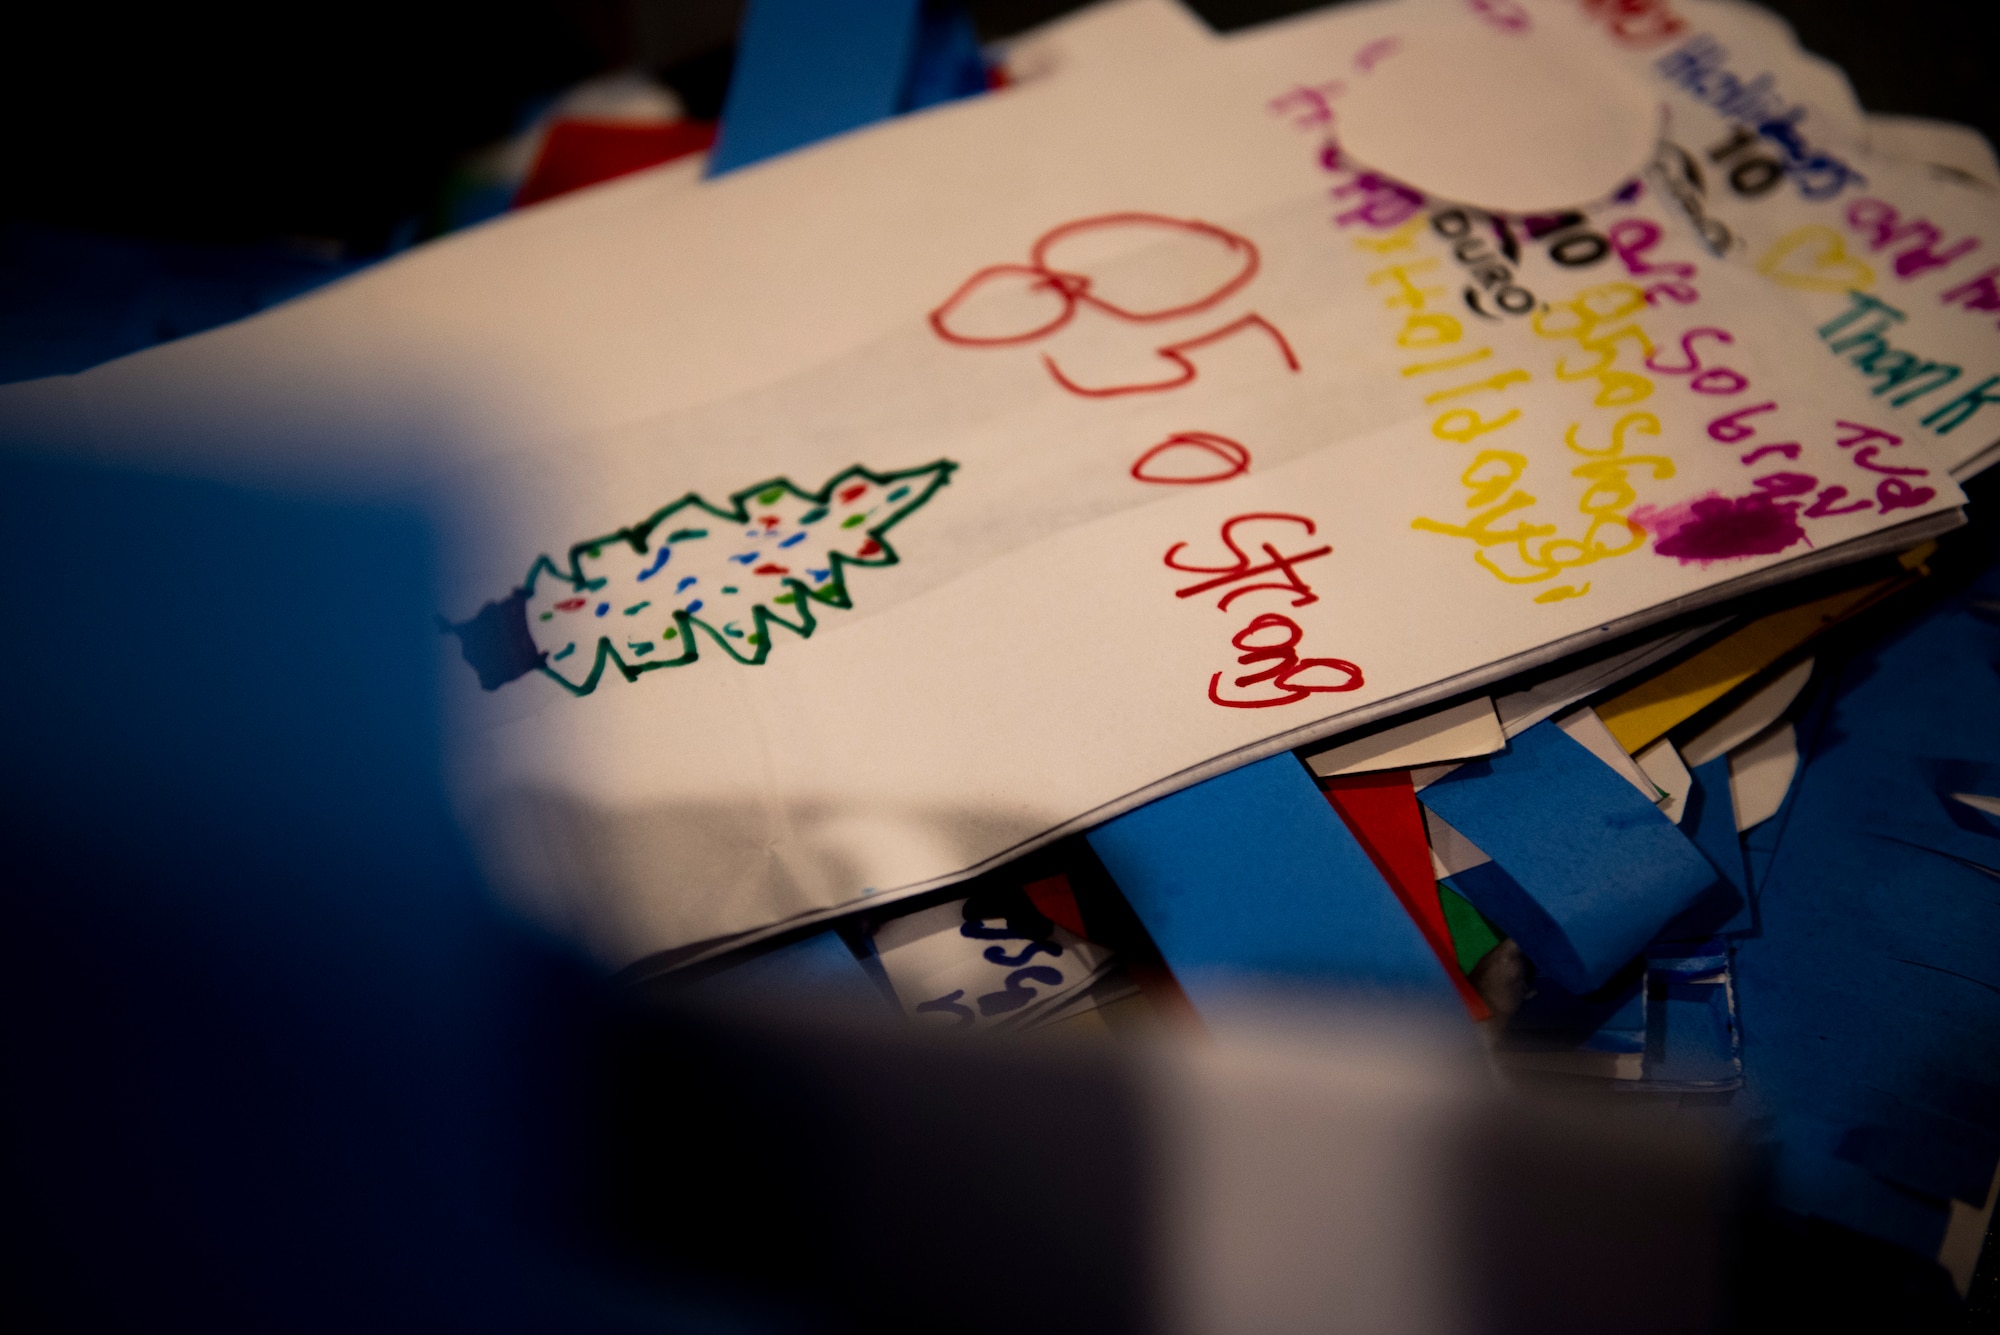 Handmade goodie bags made by students at Tyndall Elementary School, depicting holiday drawings and Panama City resiliency pictures, were used for a Cookie Caper event, at Tyndall Air Force Base, Florida, Dec. 9, 2019. The Tyndall Spouses Club and Tyndall First Sergeants collected hundreds of donated cookies to distribute to Airmen living in the on base dormitories, which were delivered in the colorful bags. (U.S. Air Force photo by Staff Sgt. Magen M. Reeves)